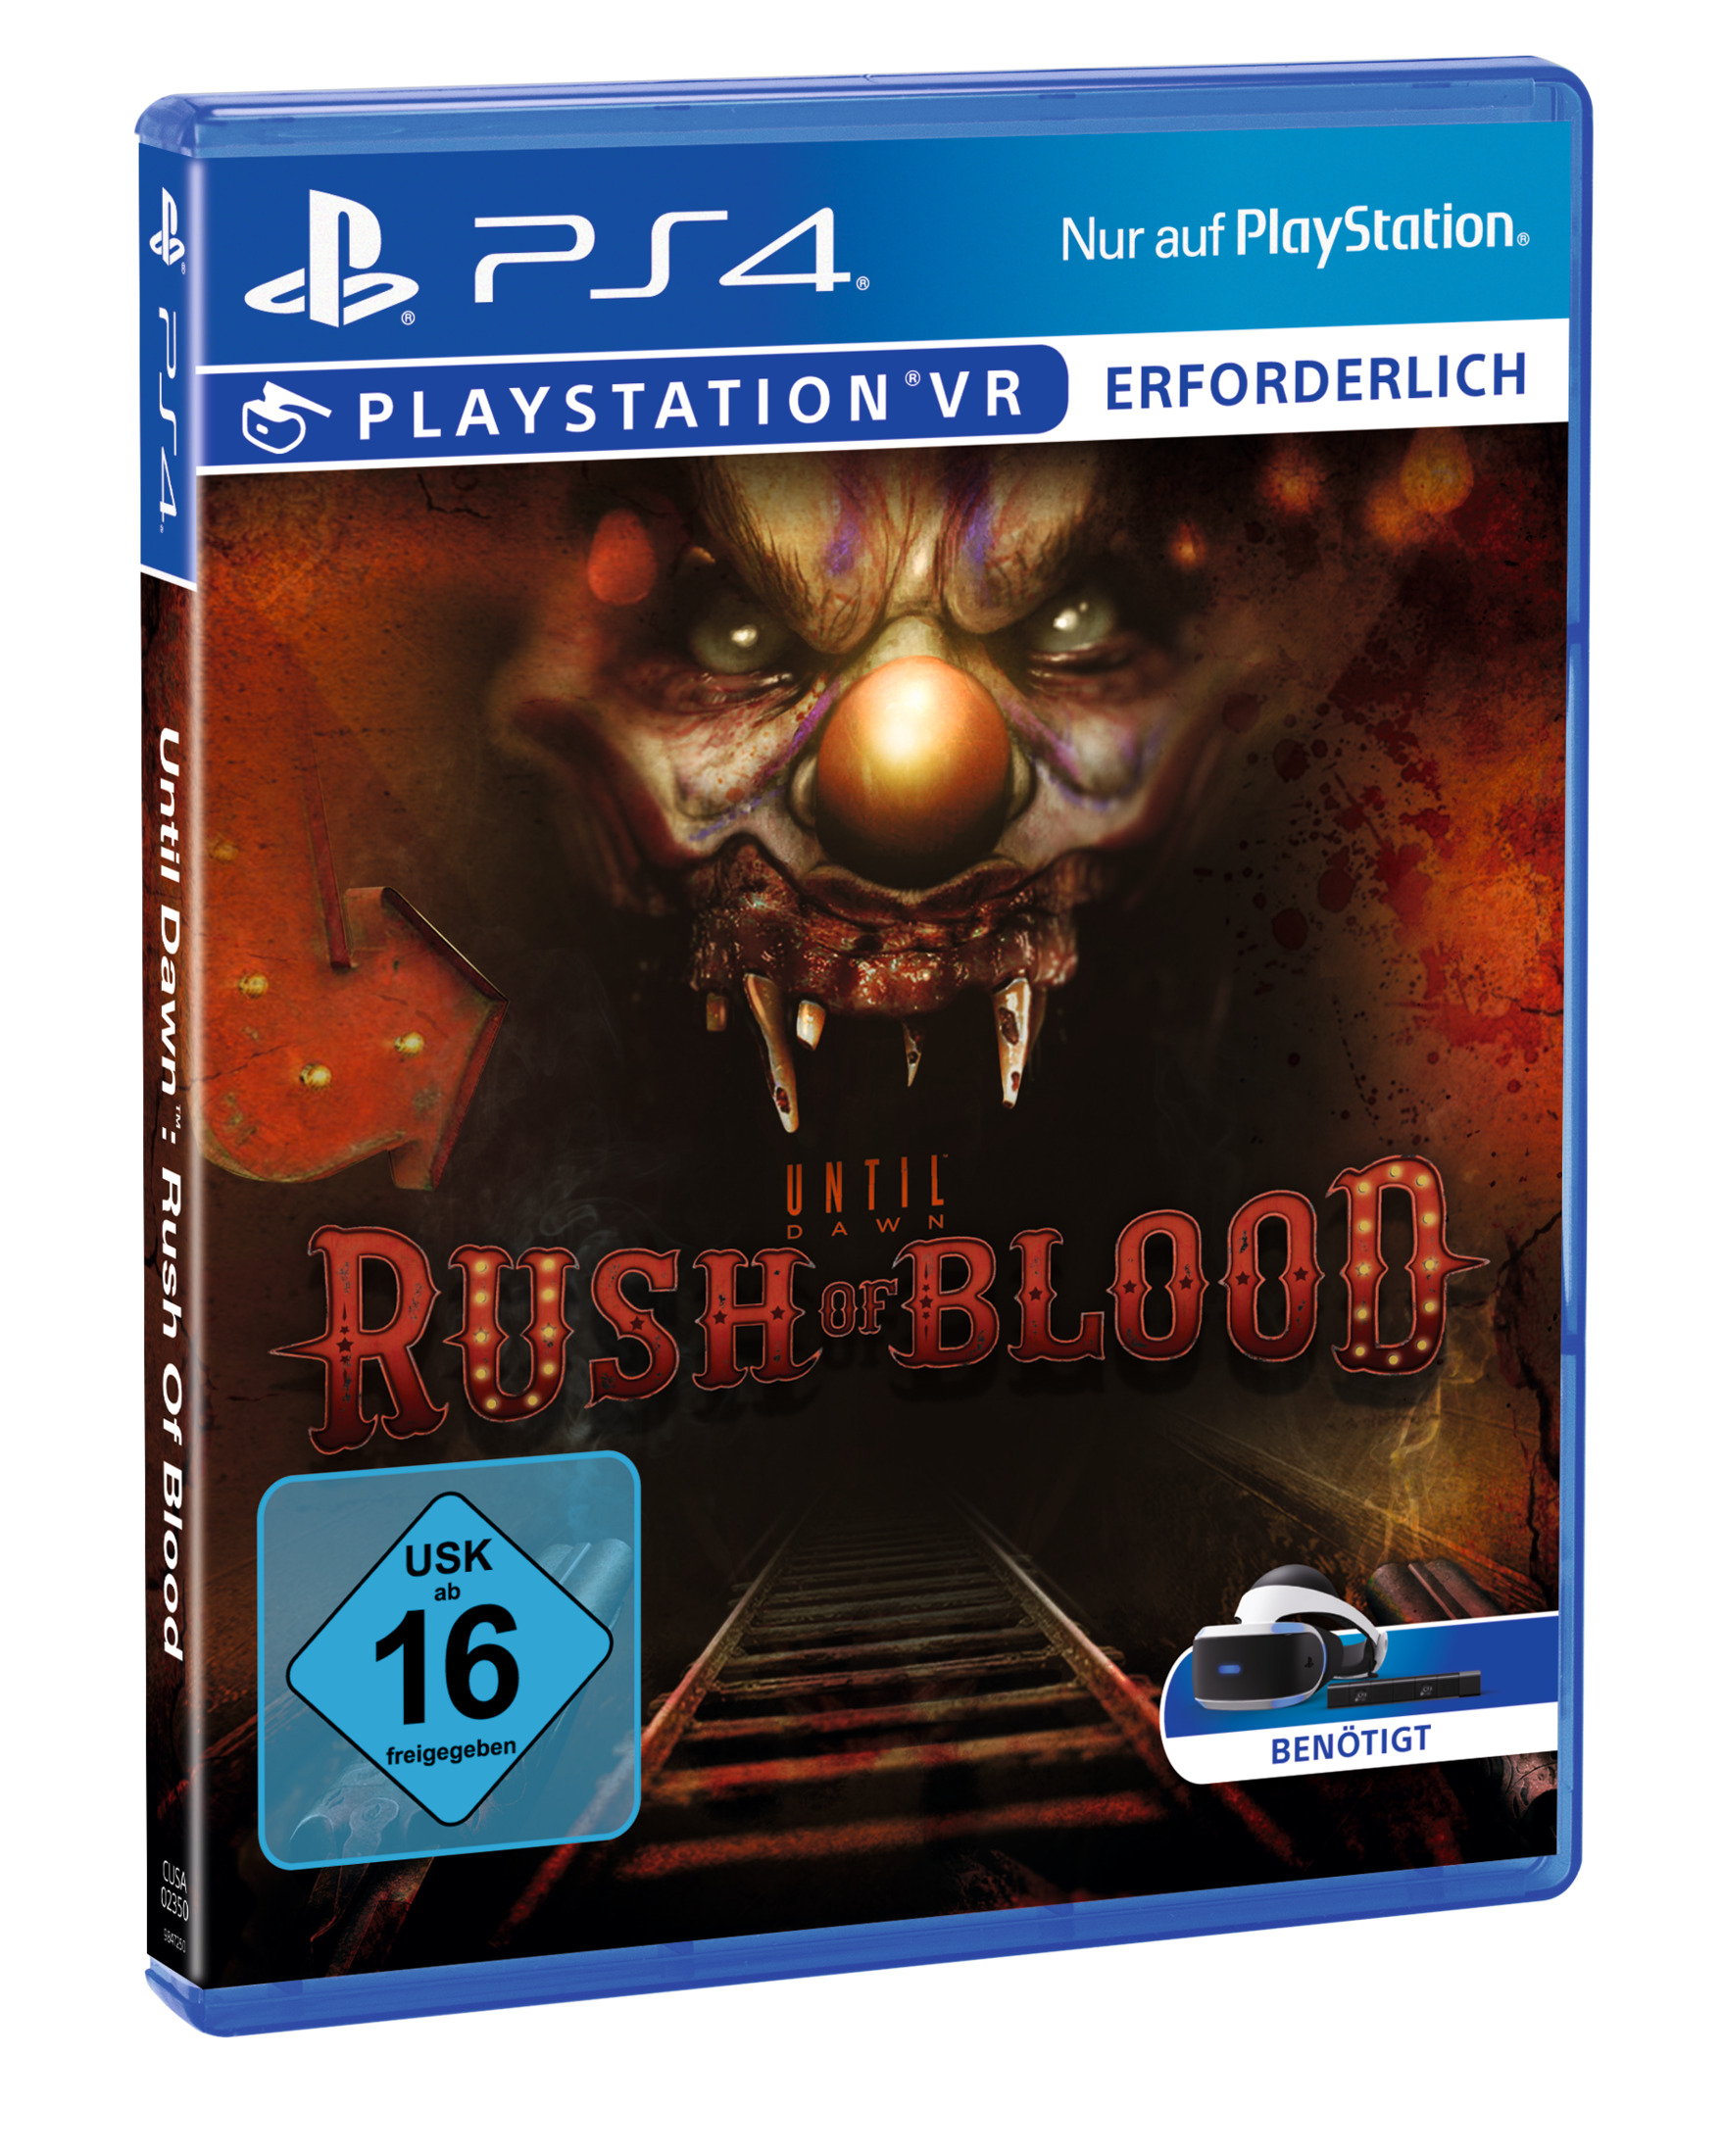 Until Dawn: Rush 4] [PlayStation Blood - (VR only) of